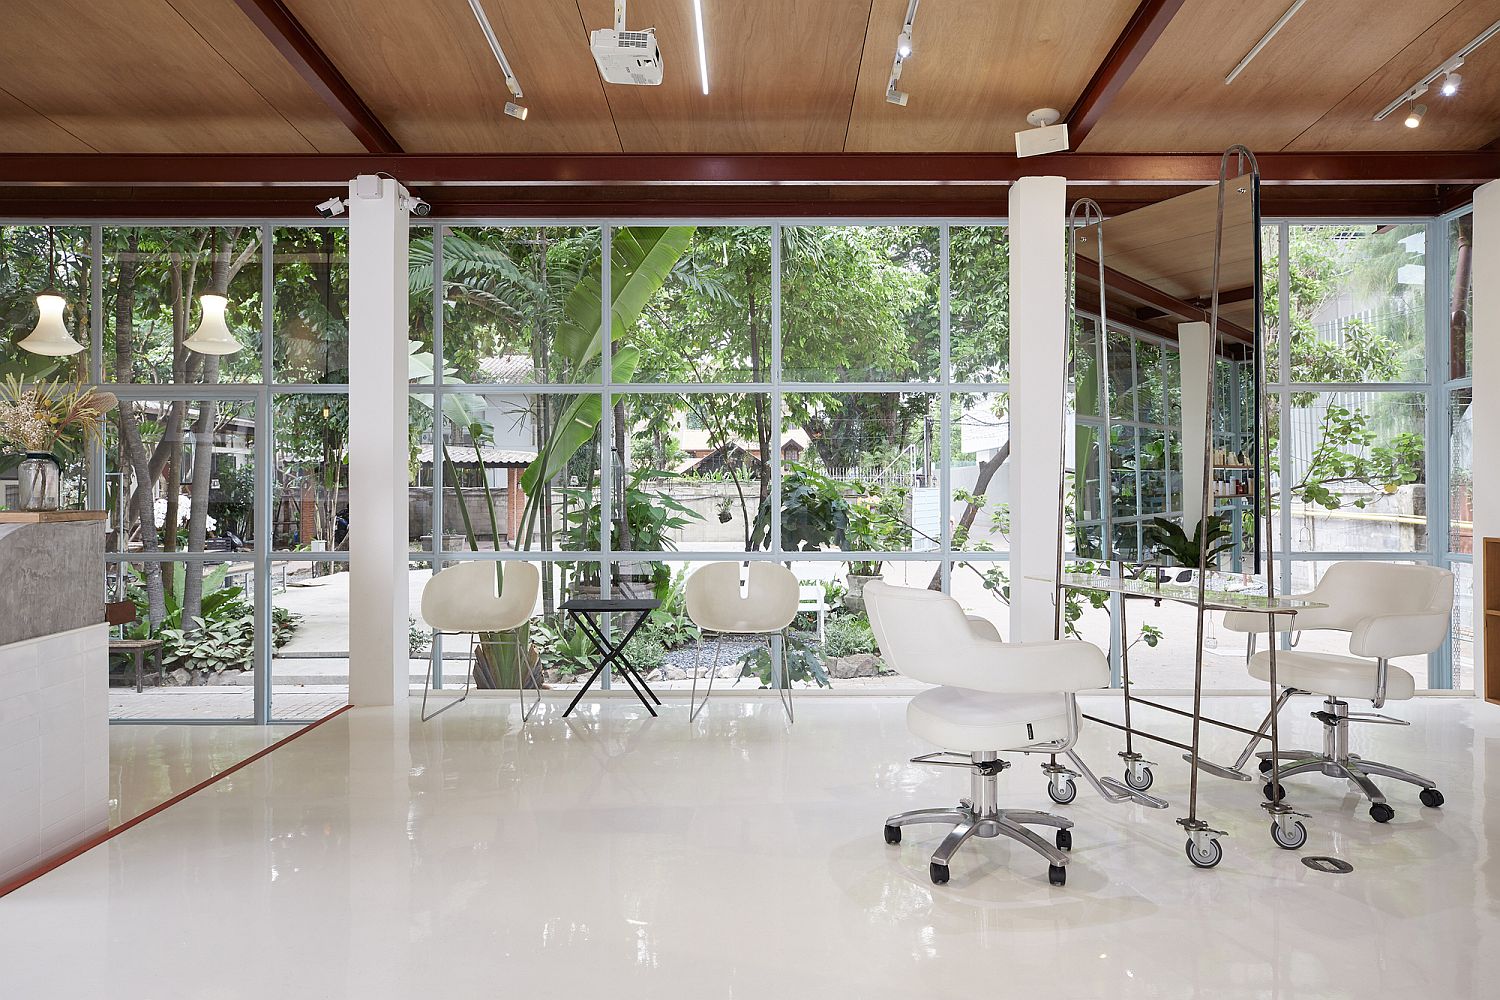 Framed-glass-walls-of-the-salon-connect-the-interior-with-the-world-outside